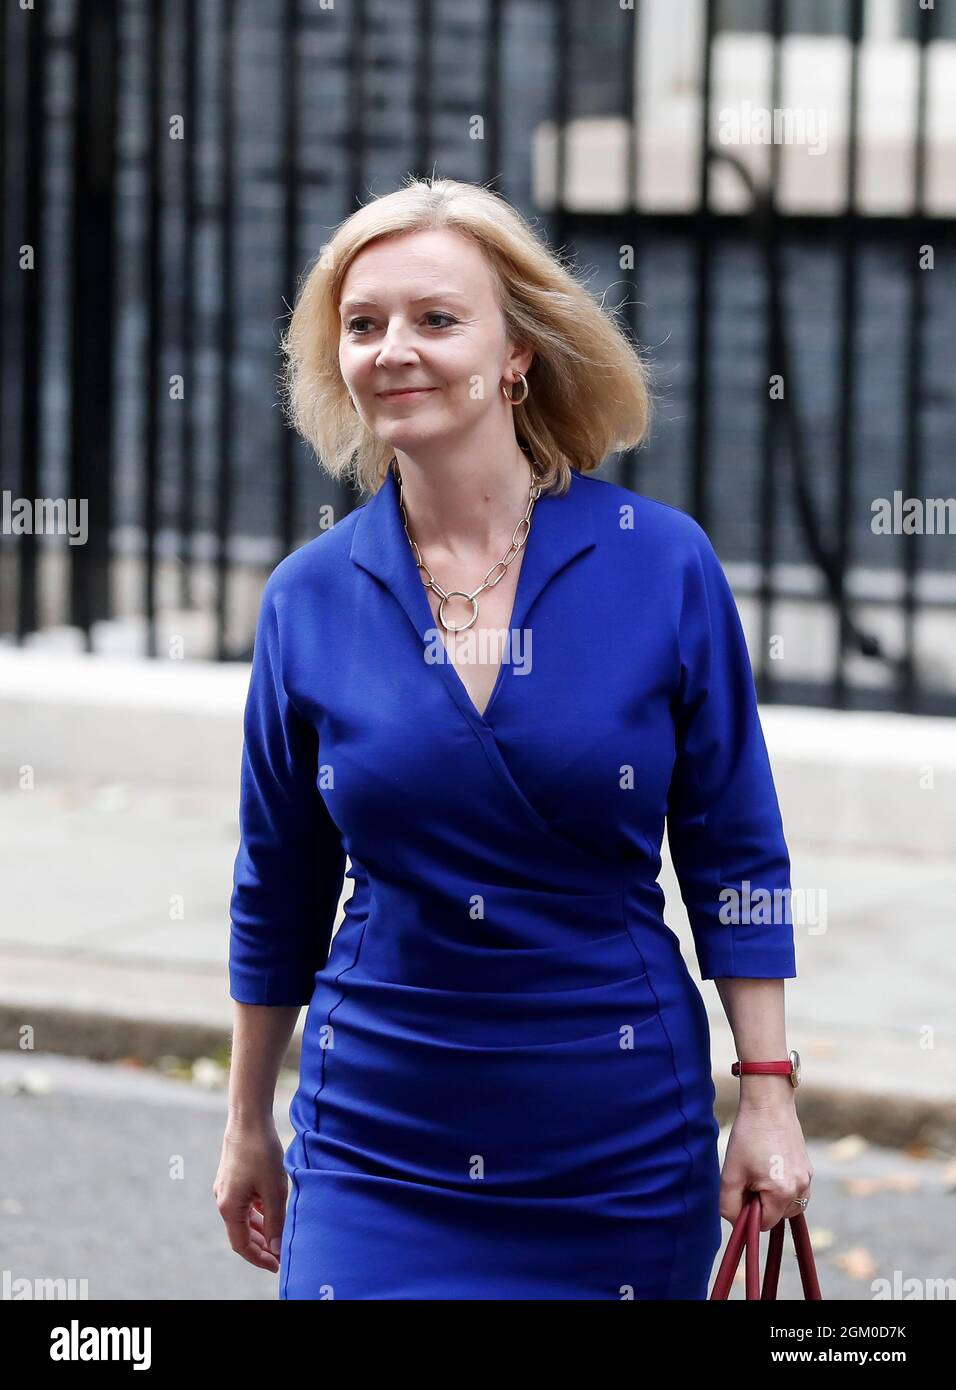 London, Britain. 15th Sep, 2021. Liz Truss leaves 10 Downing Street in London, Britain, on Sept. 15, 2021. Liz Truss, who was international trade secretary, has become the second woman to hold the position of foreign secretary. British Prime Minister Boris Johnson reshuffled his cabinet on Wednesday. Credit: Han Yan/Xinhua/Alamy Live News Stock Photo